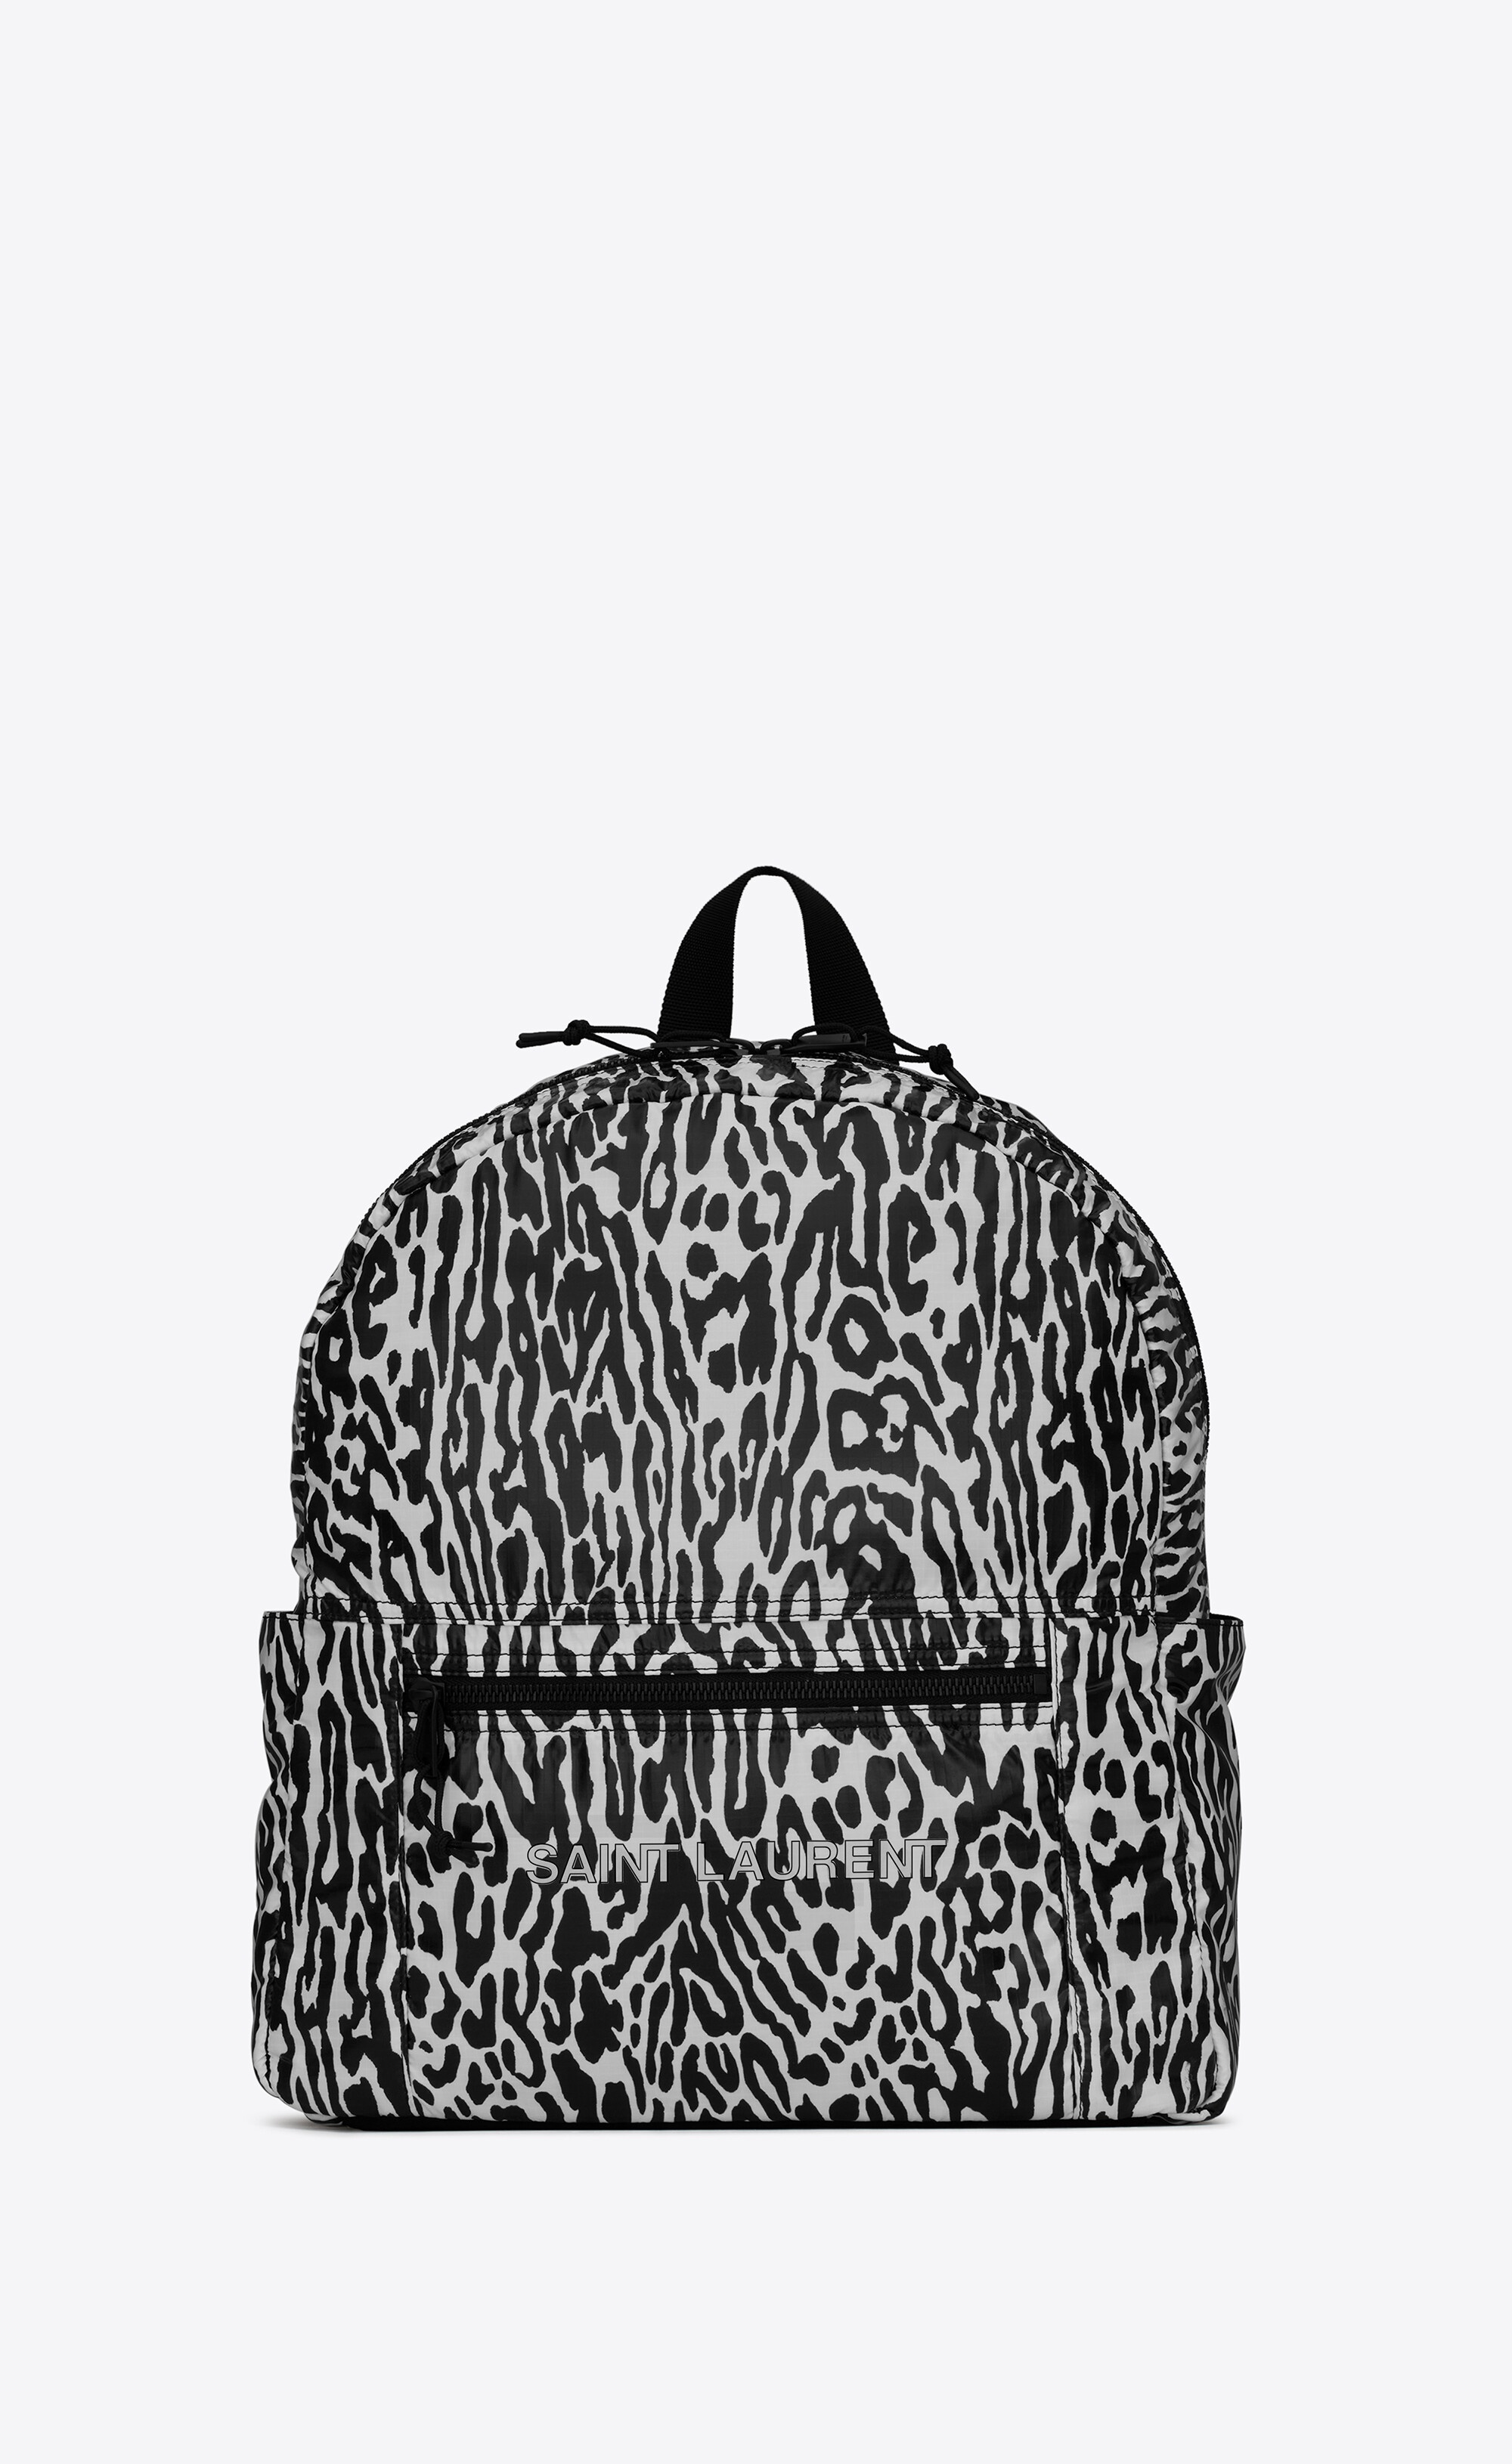 nuxx backpack in leopard print nylon - 1